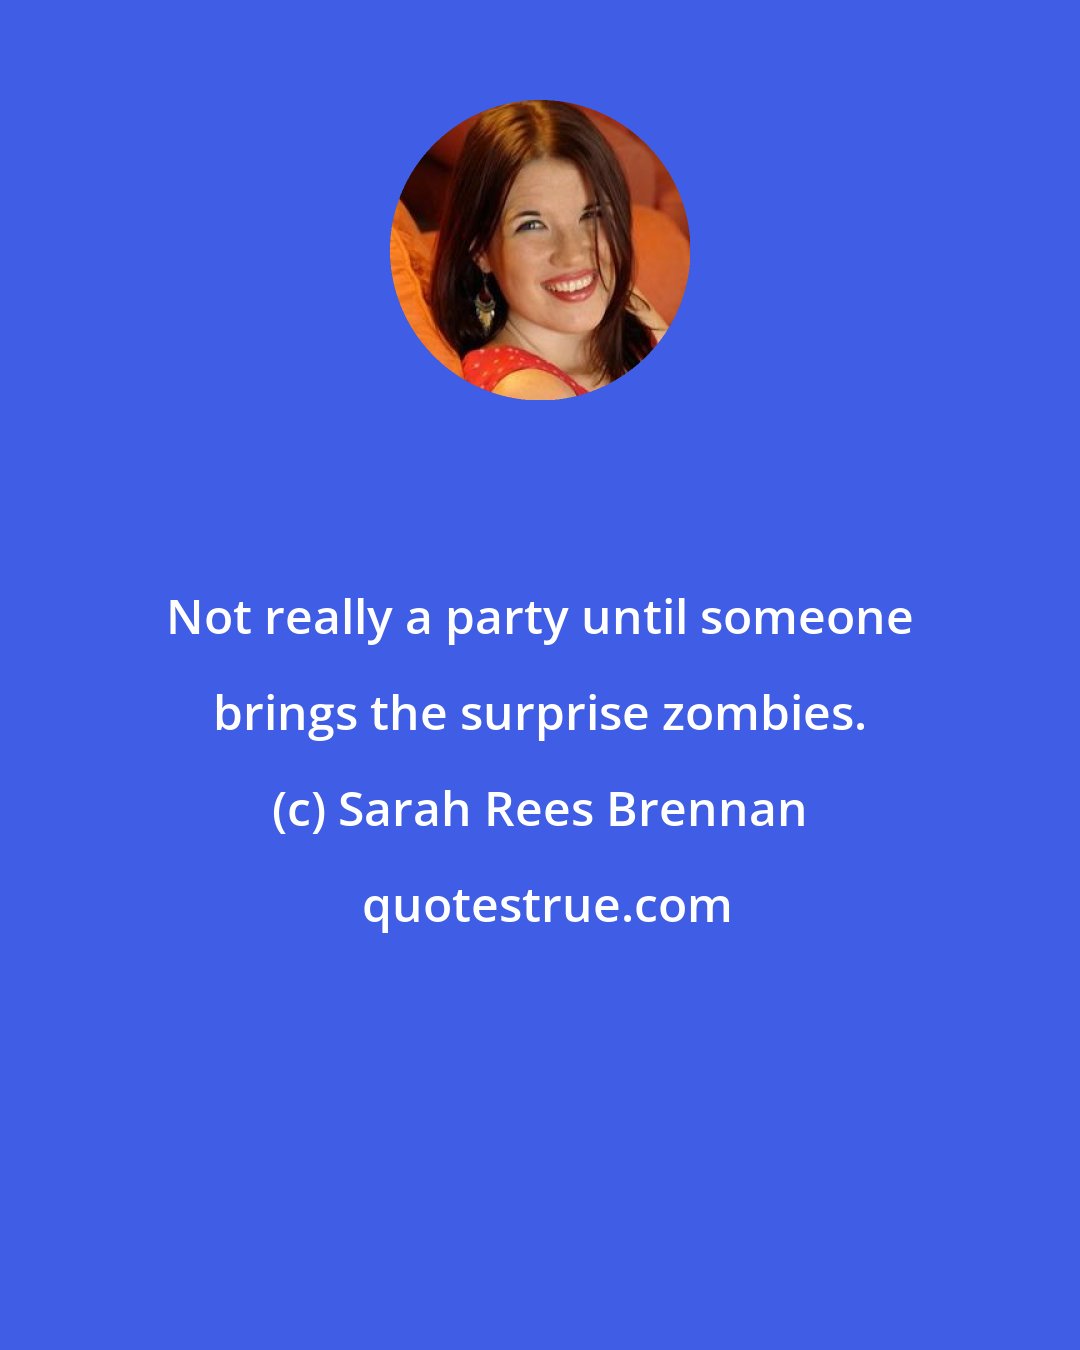 Sarah Rees Brennan: Not really a party until someone brings the surprise zombies.